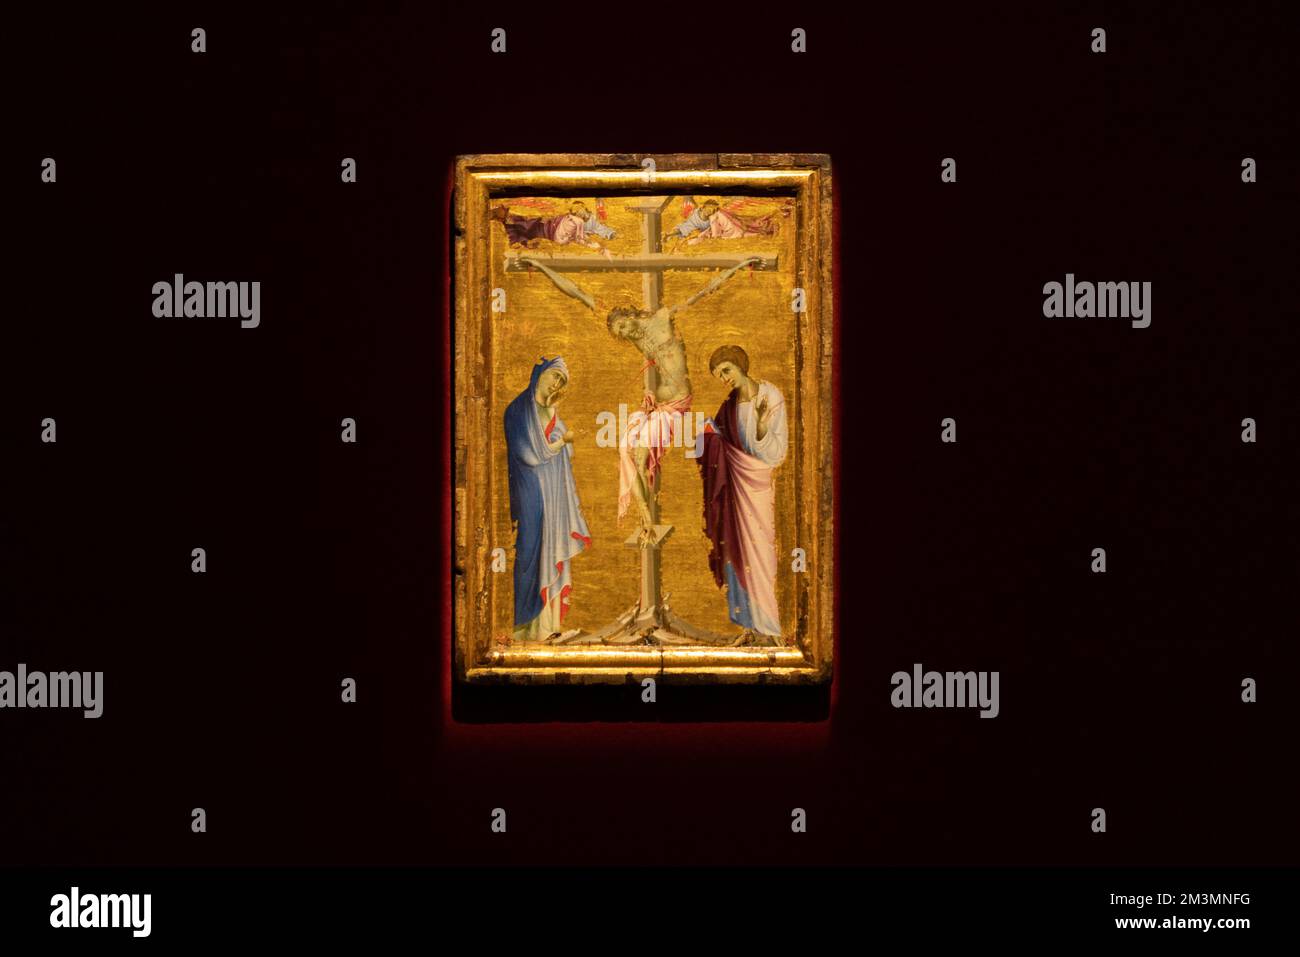 Bolognese School, 13th Century, Crucifixion with the Virgin, Saint John the Evangelist, and two grieving angels, tempera on panel, gold ground, goes o Stock Photo